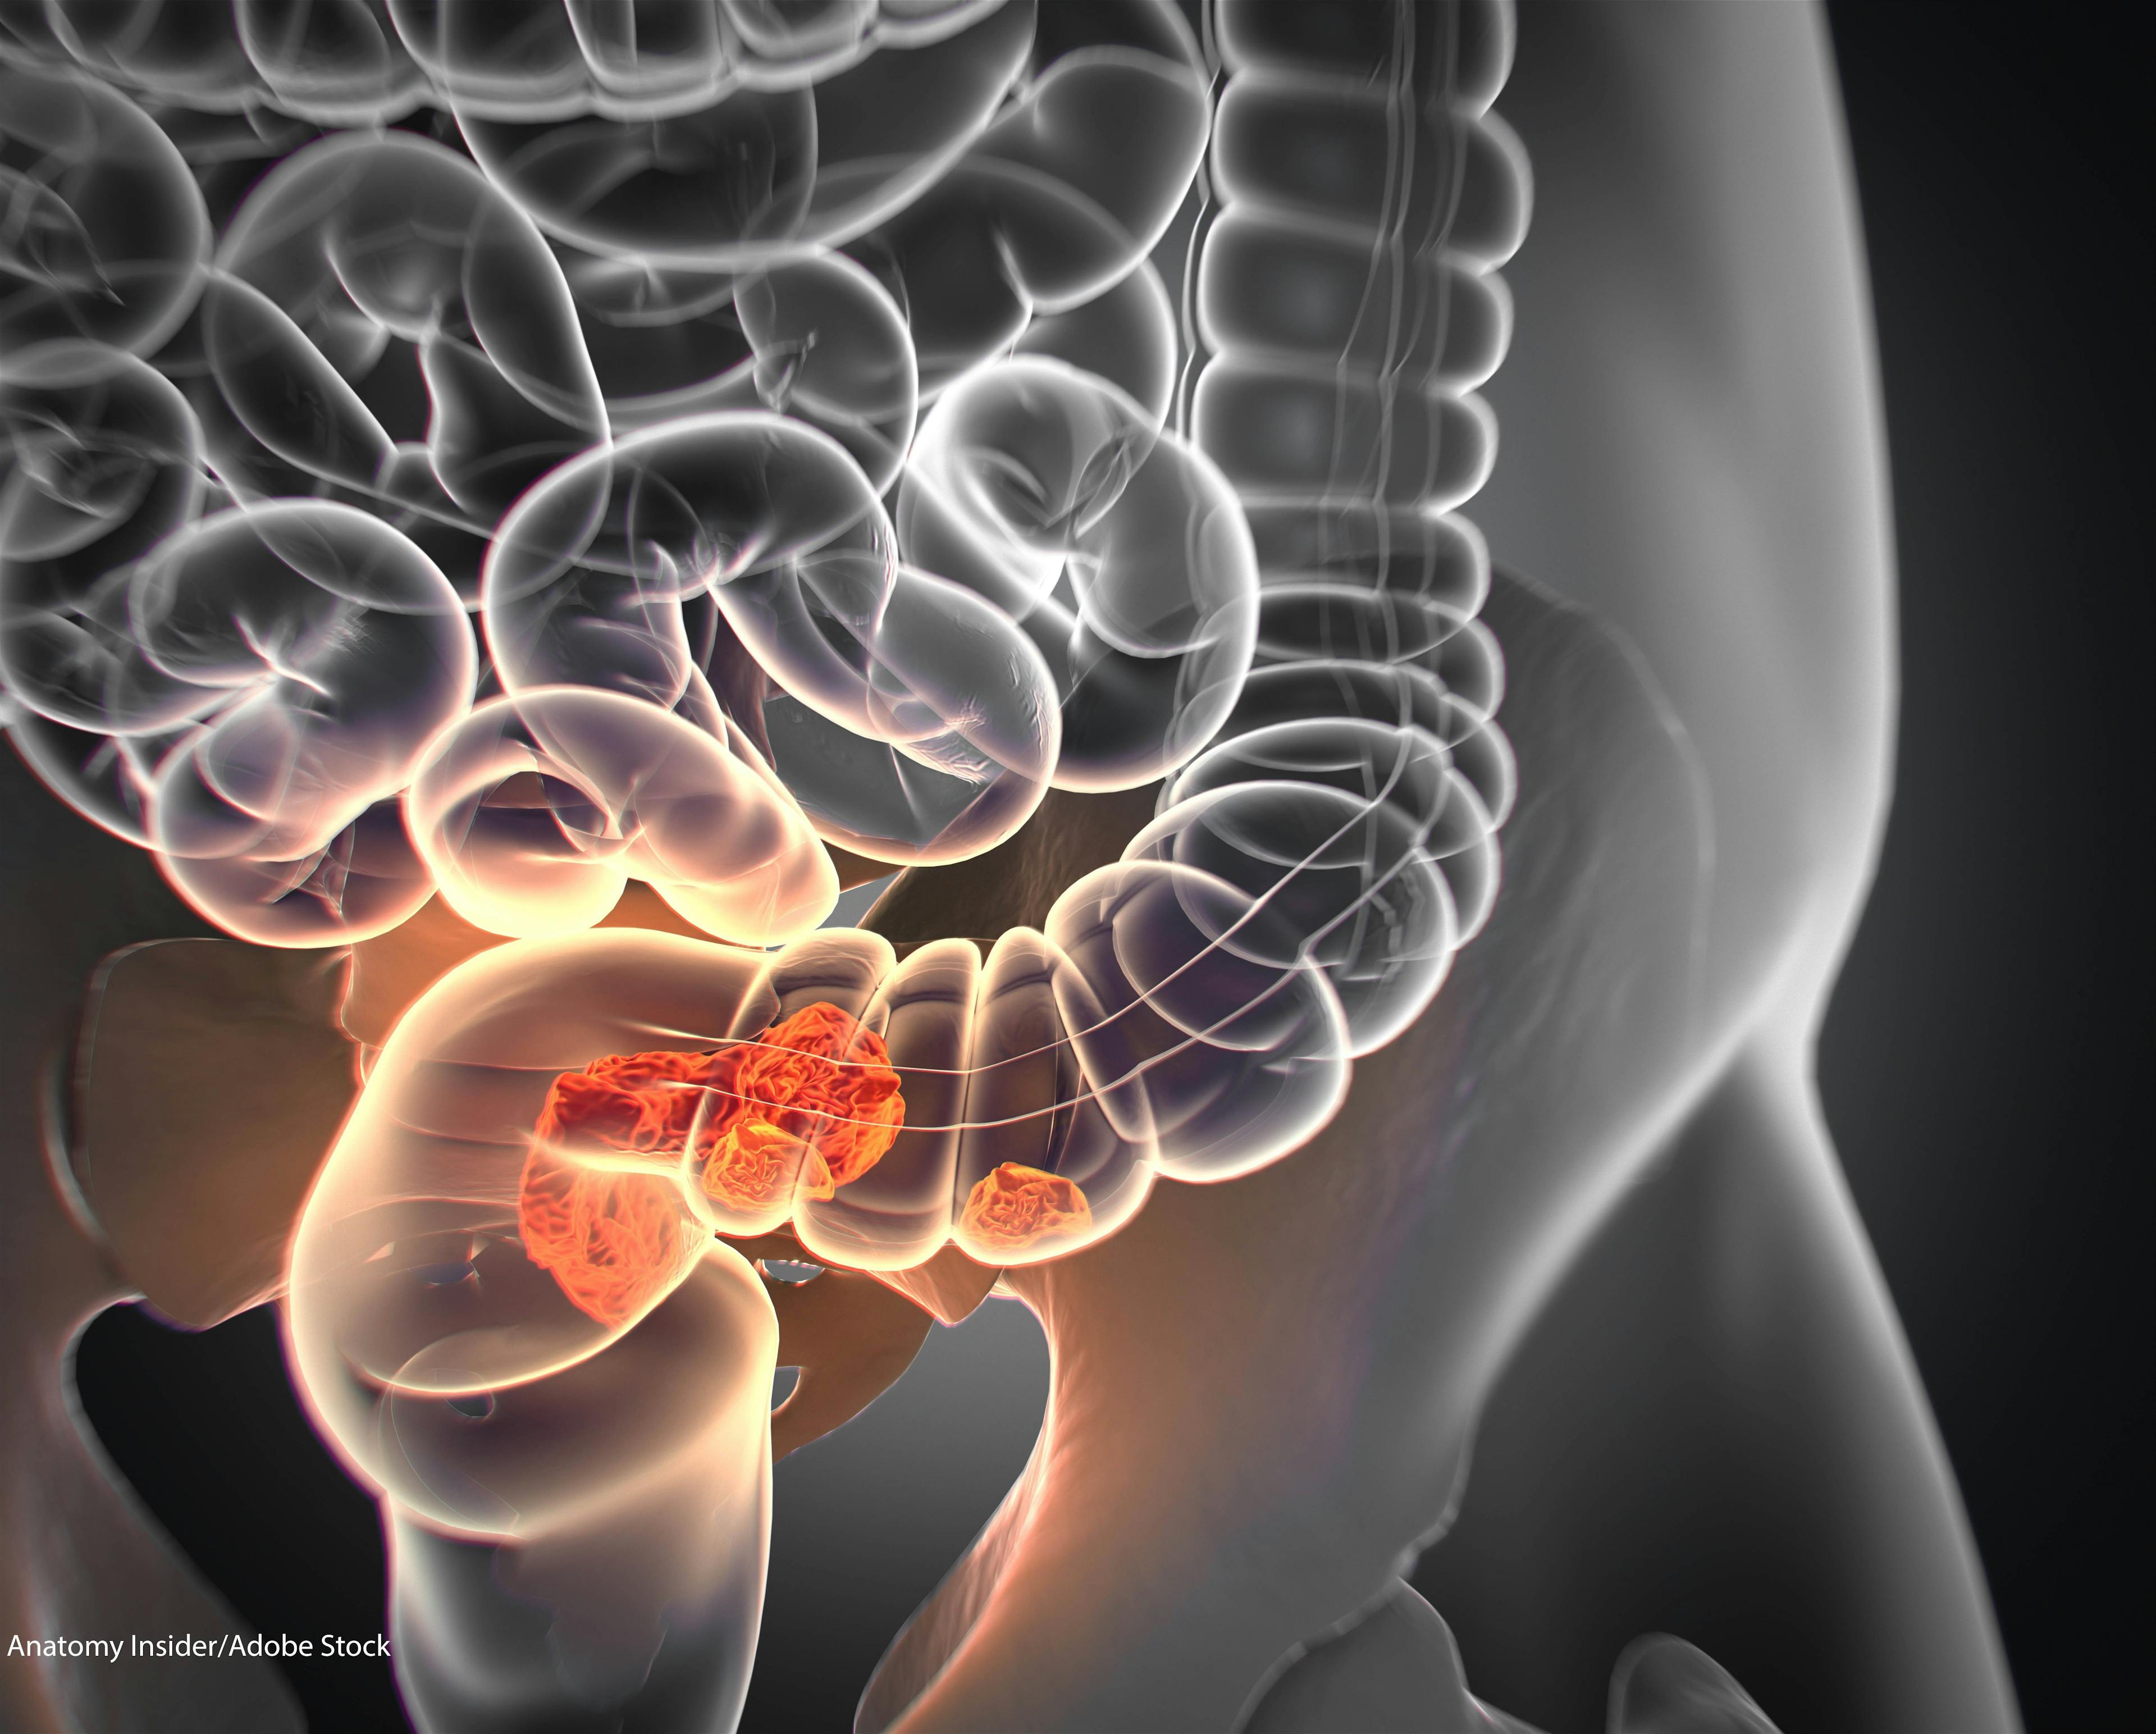 Despite Guidelines, Some with Metastatic Colon Cancer Not Tested for Biomarkers